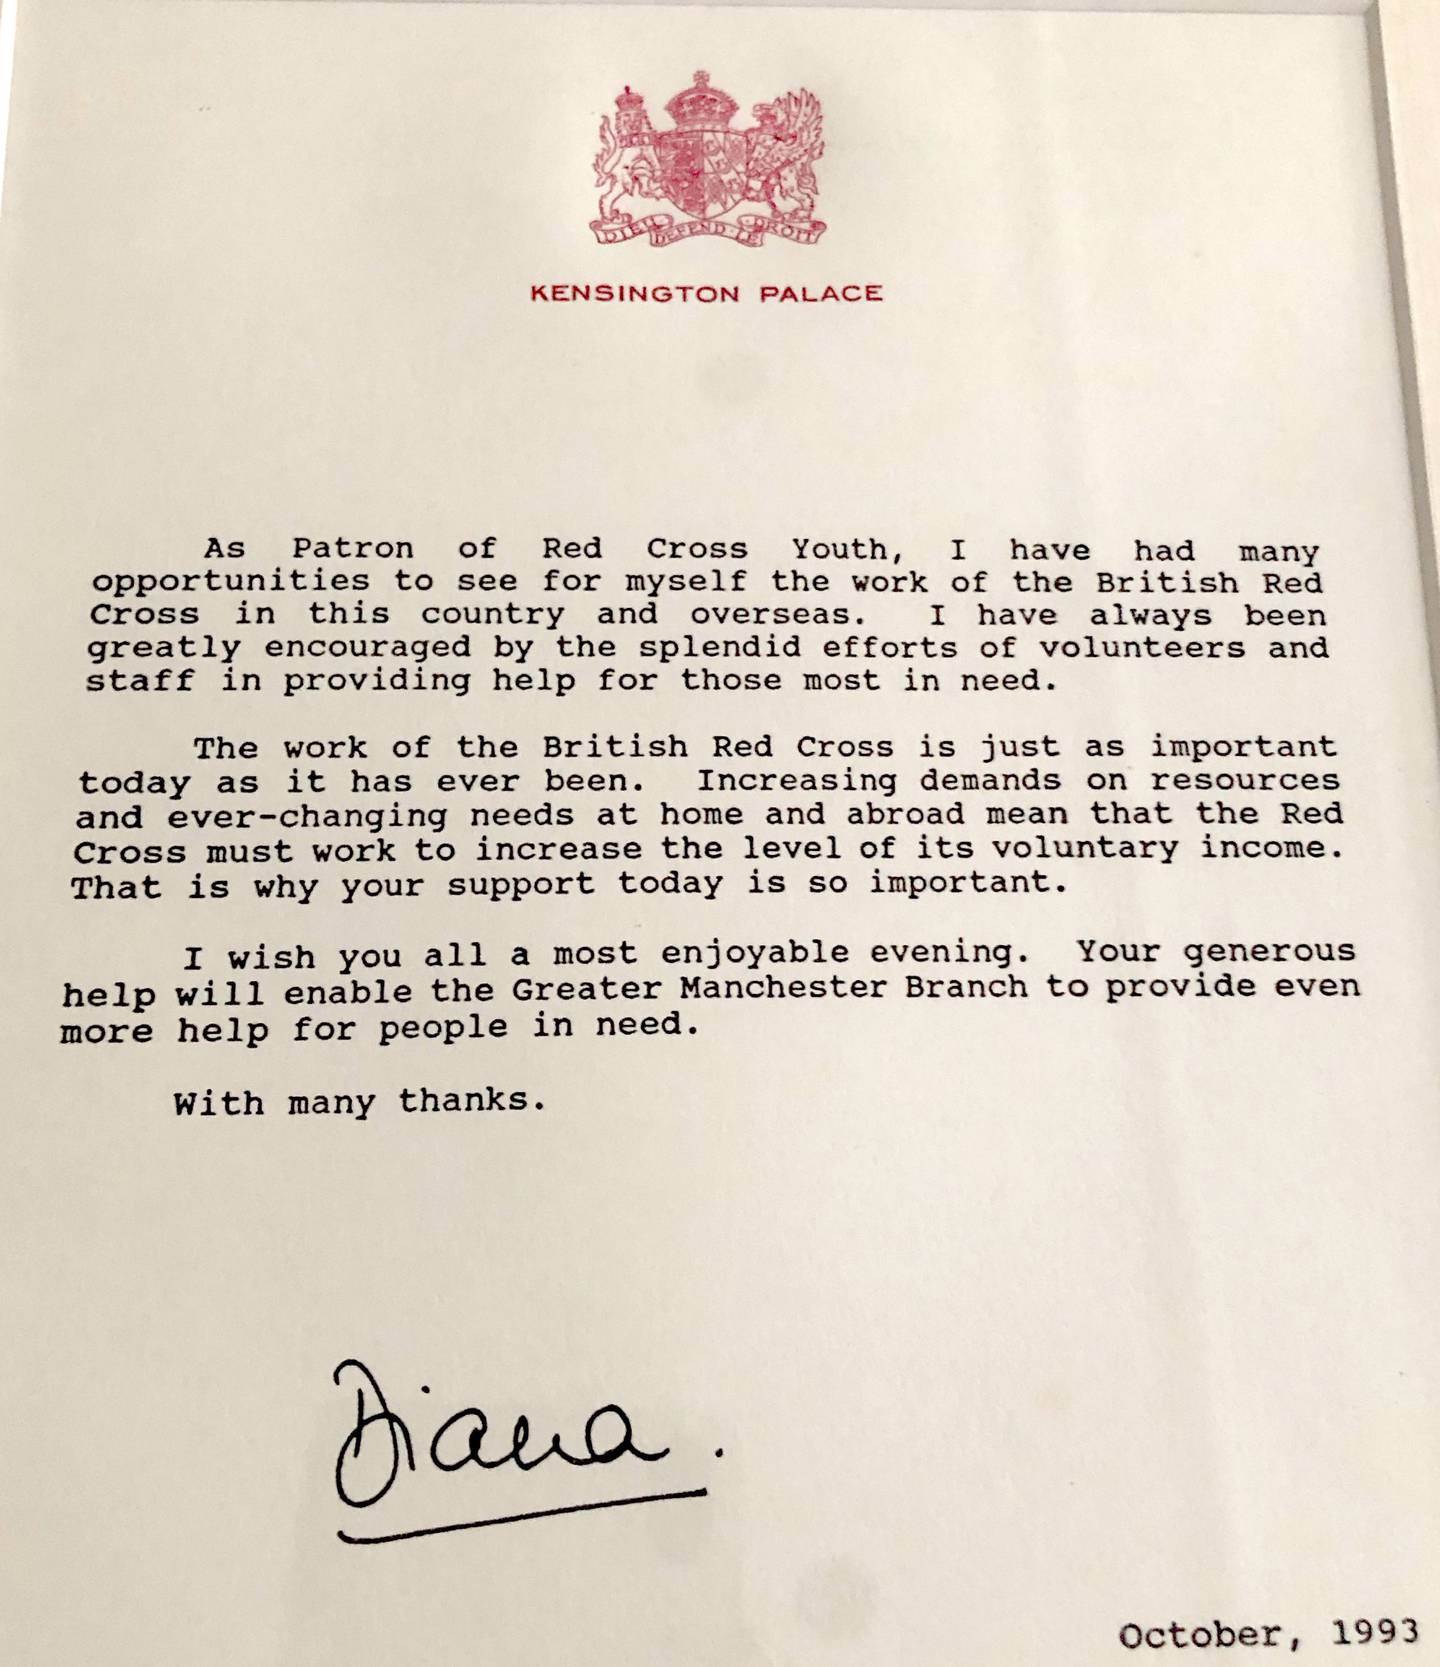 Princess Diana's letter to the Manchester branch of the Red Cross. Photo: British Red Cross